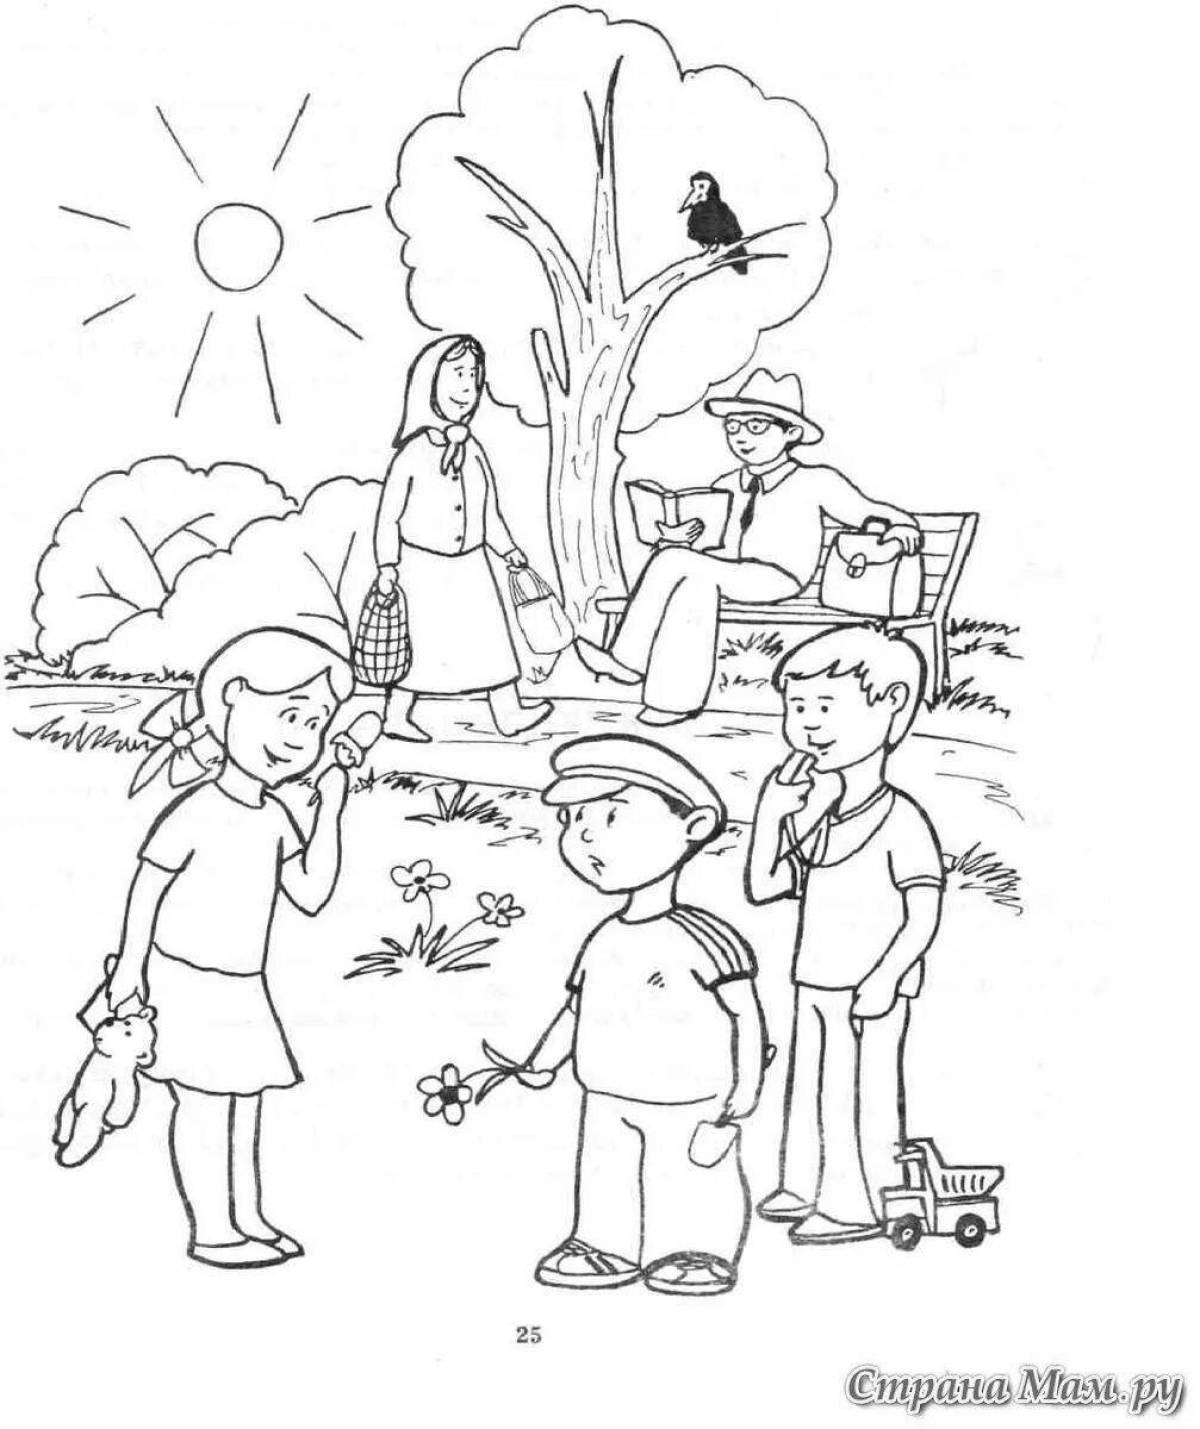 Coloring page magnanimous russia